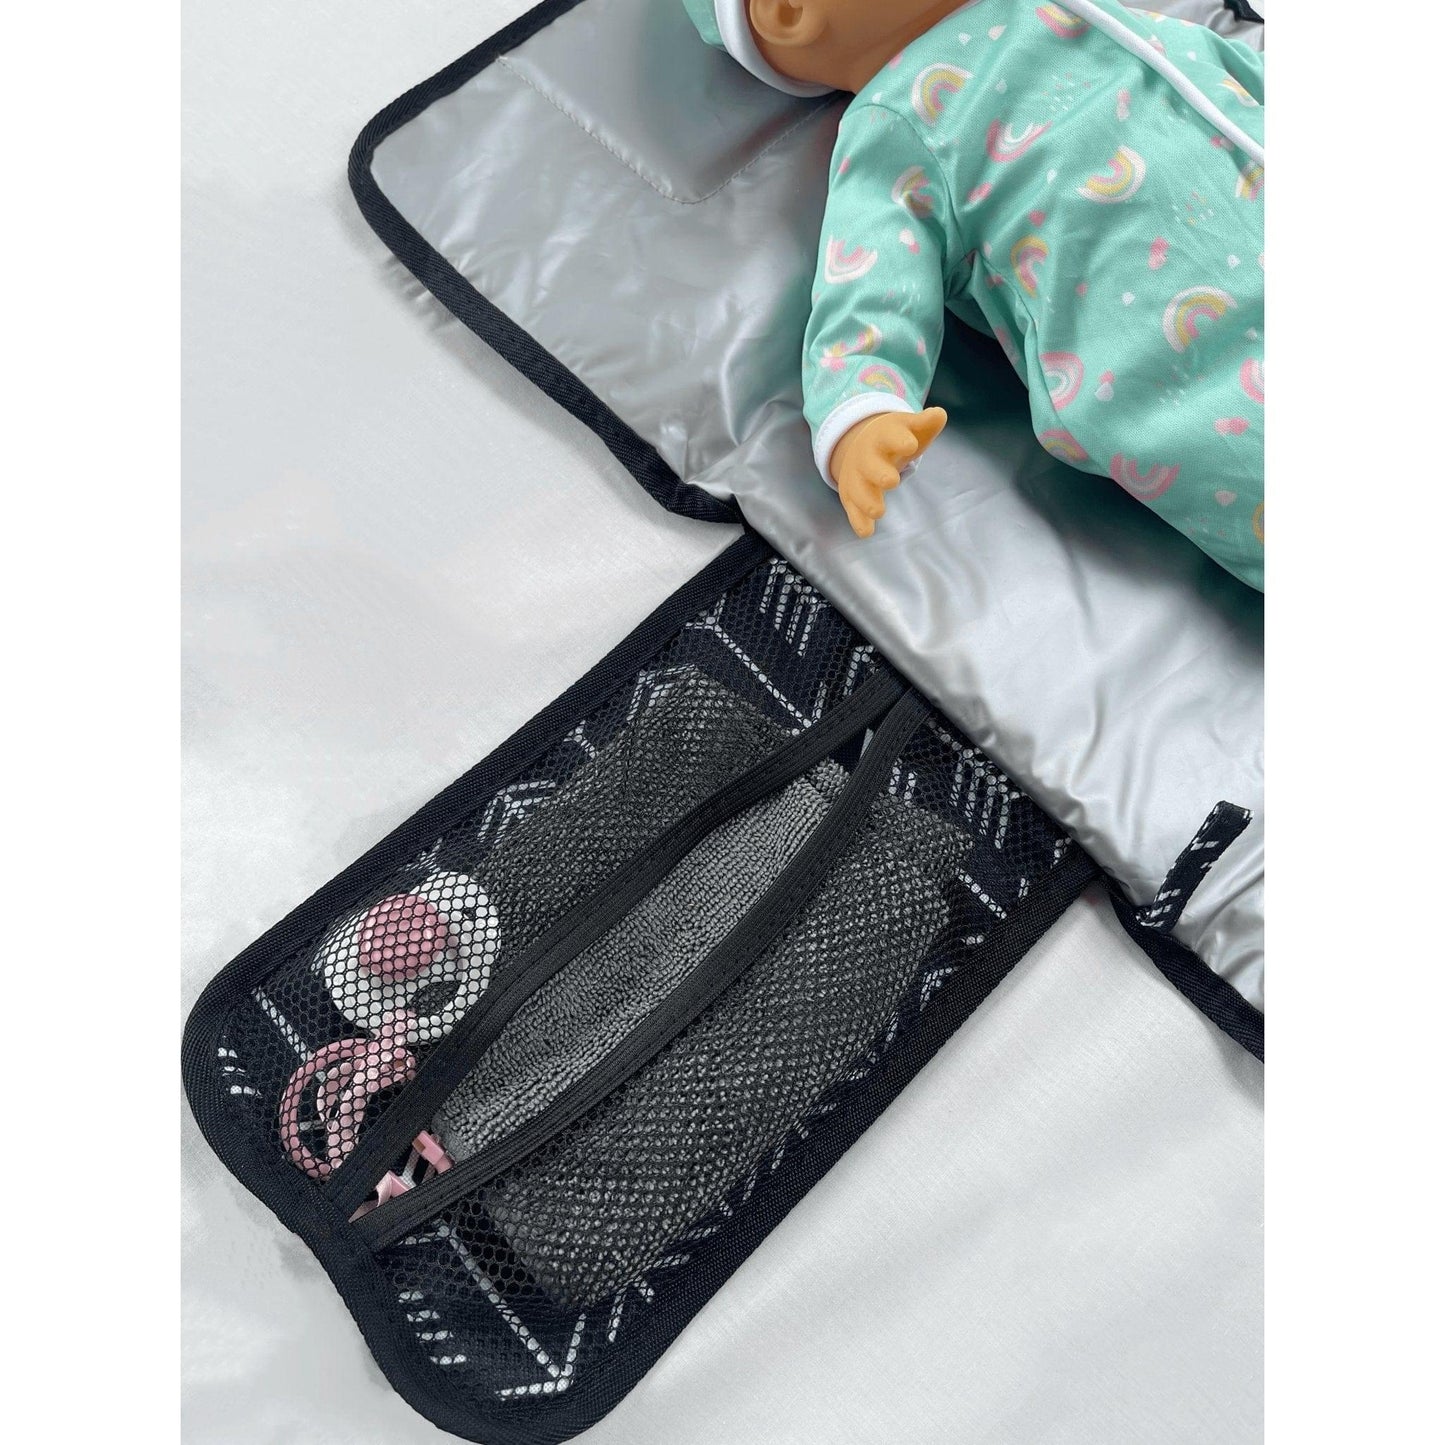 Holds baby essentials and is waterproof